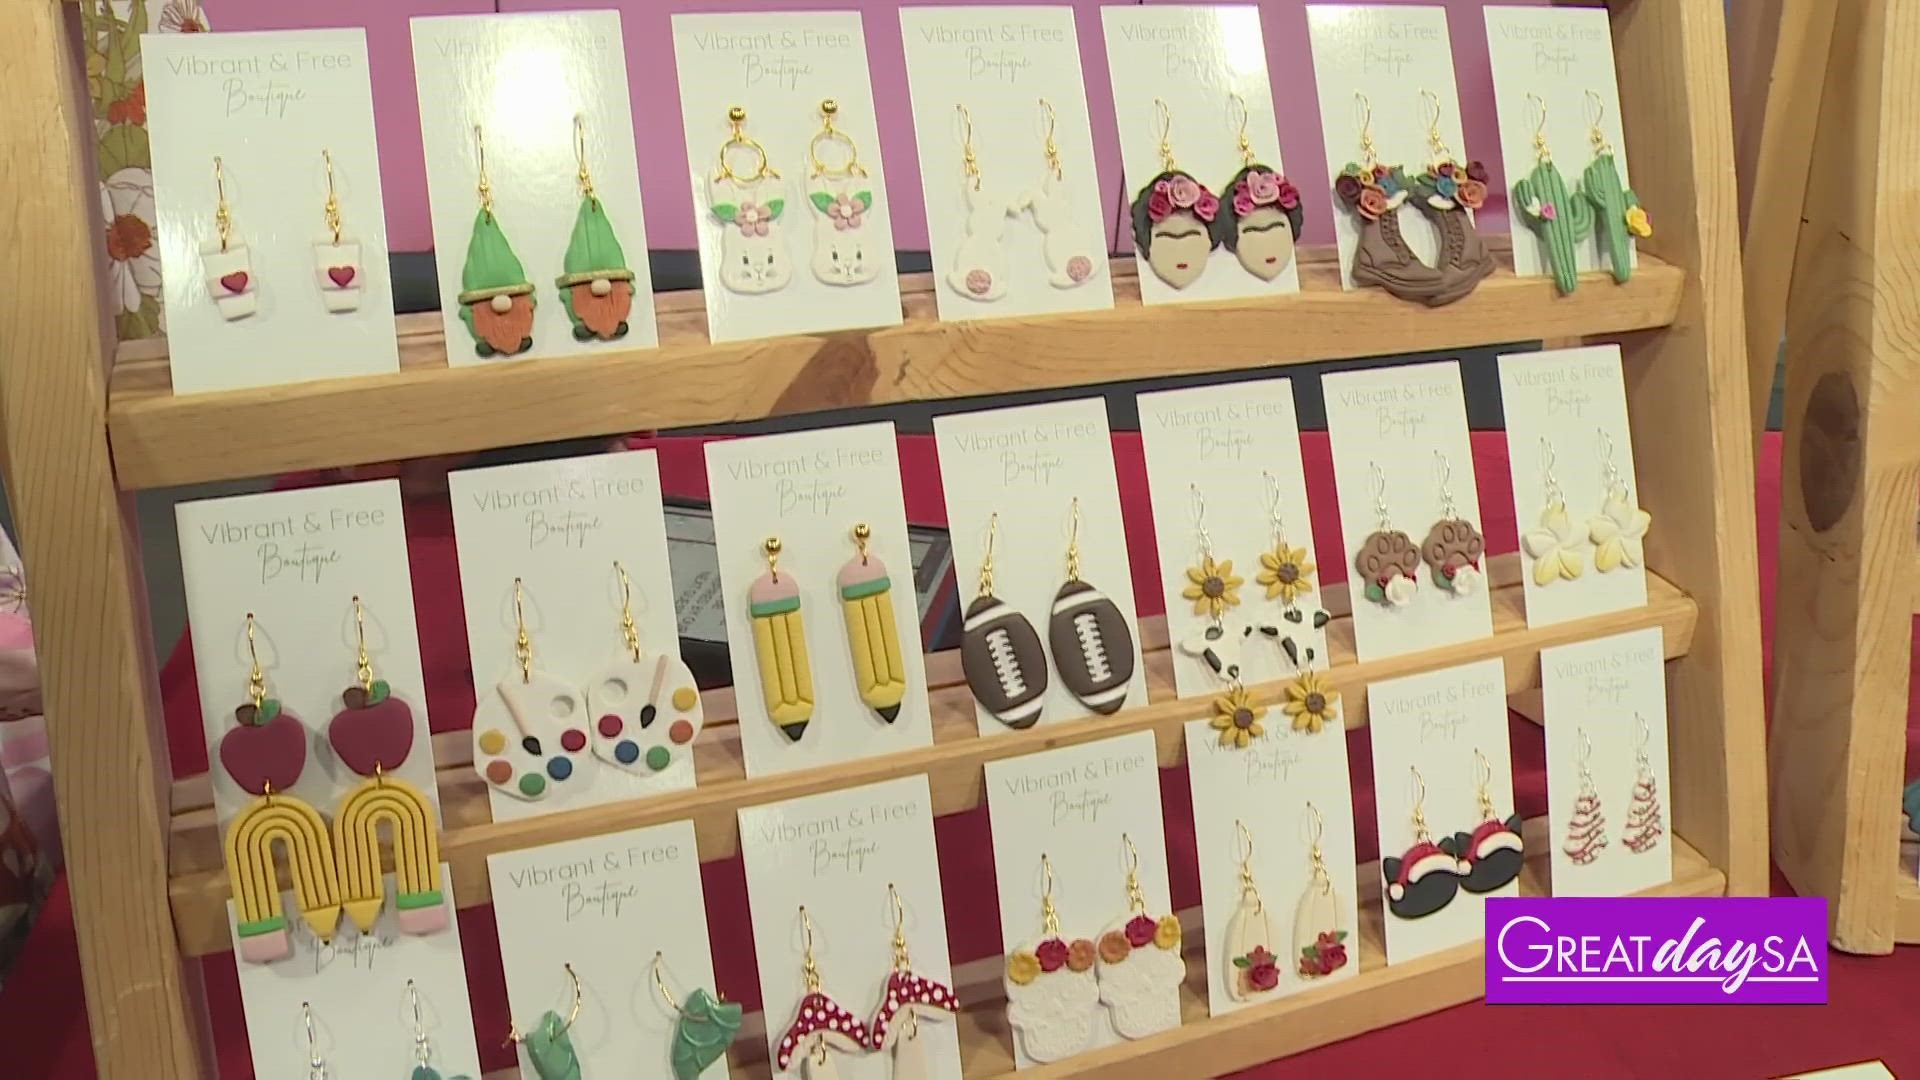 Tiffany with Vibrant & Free Boutique shares her earring designs and inspiration.